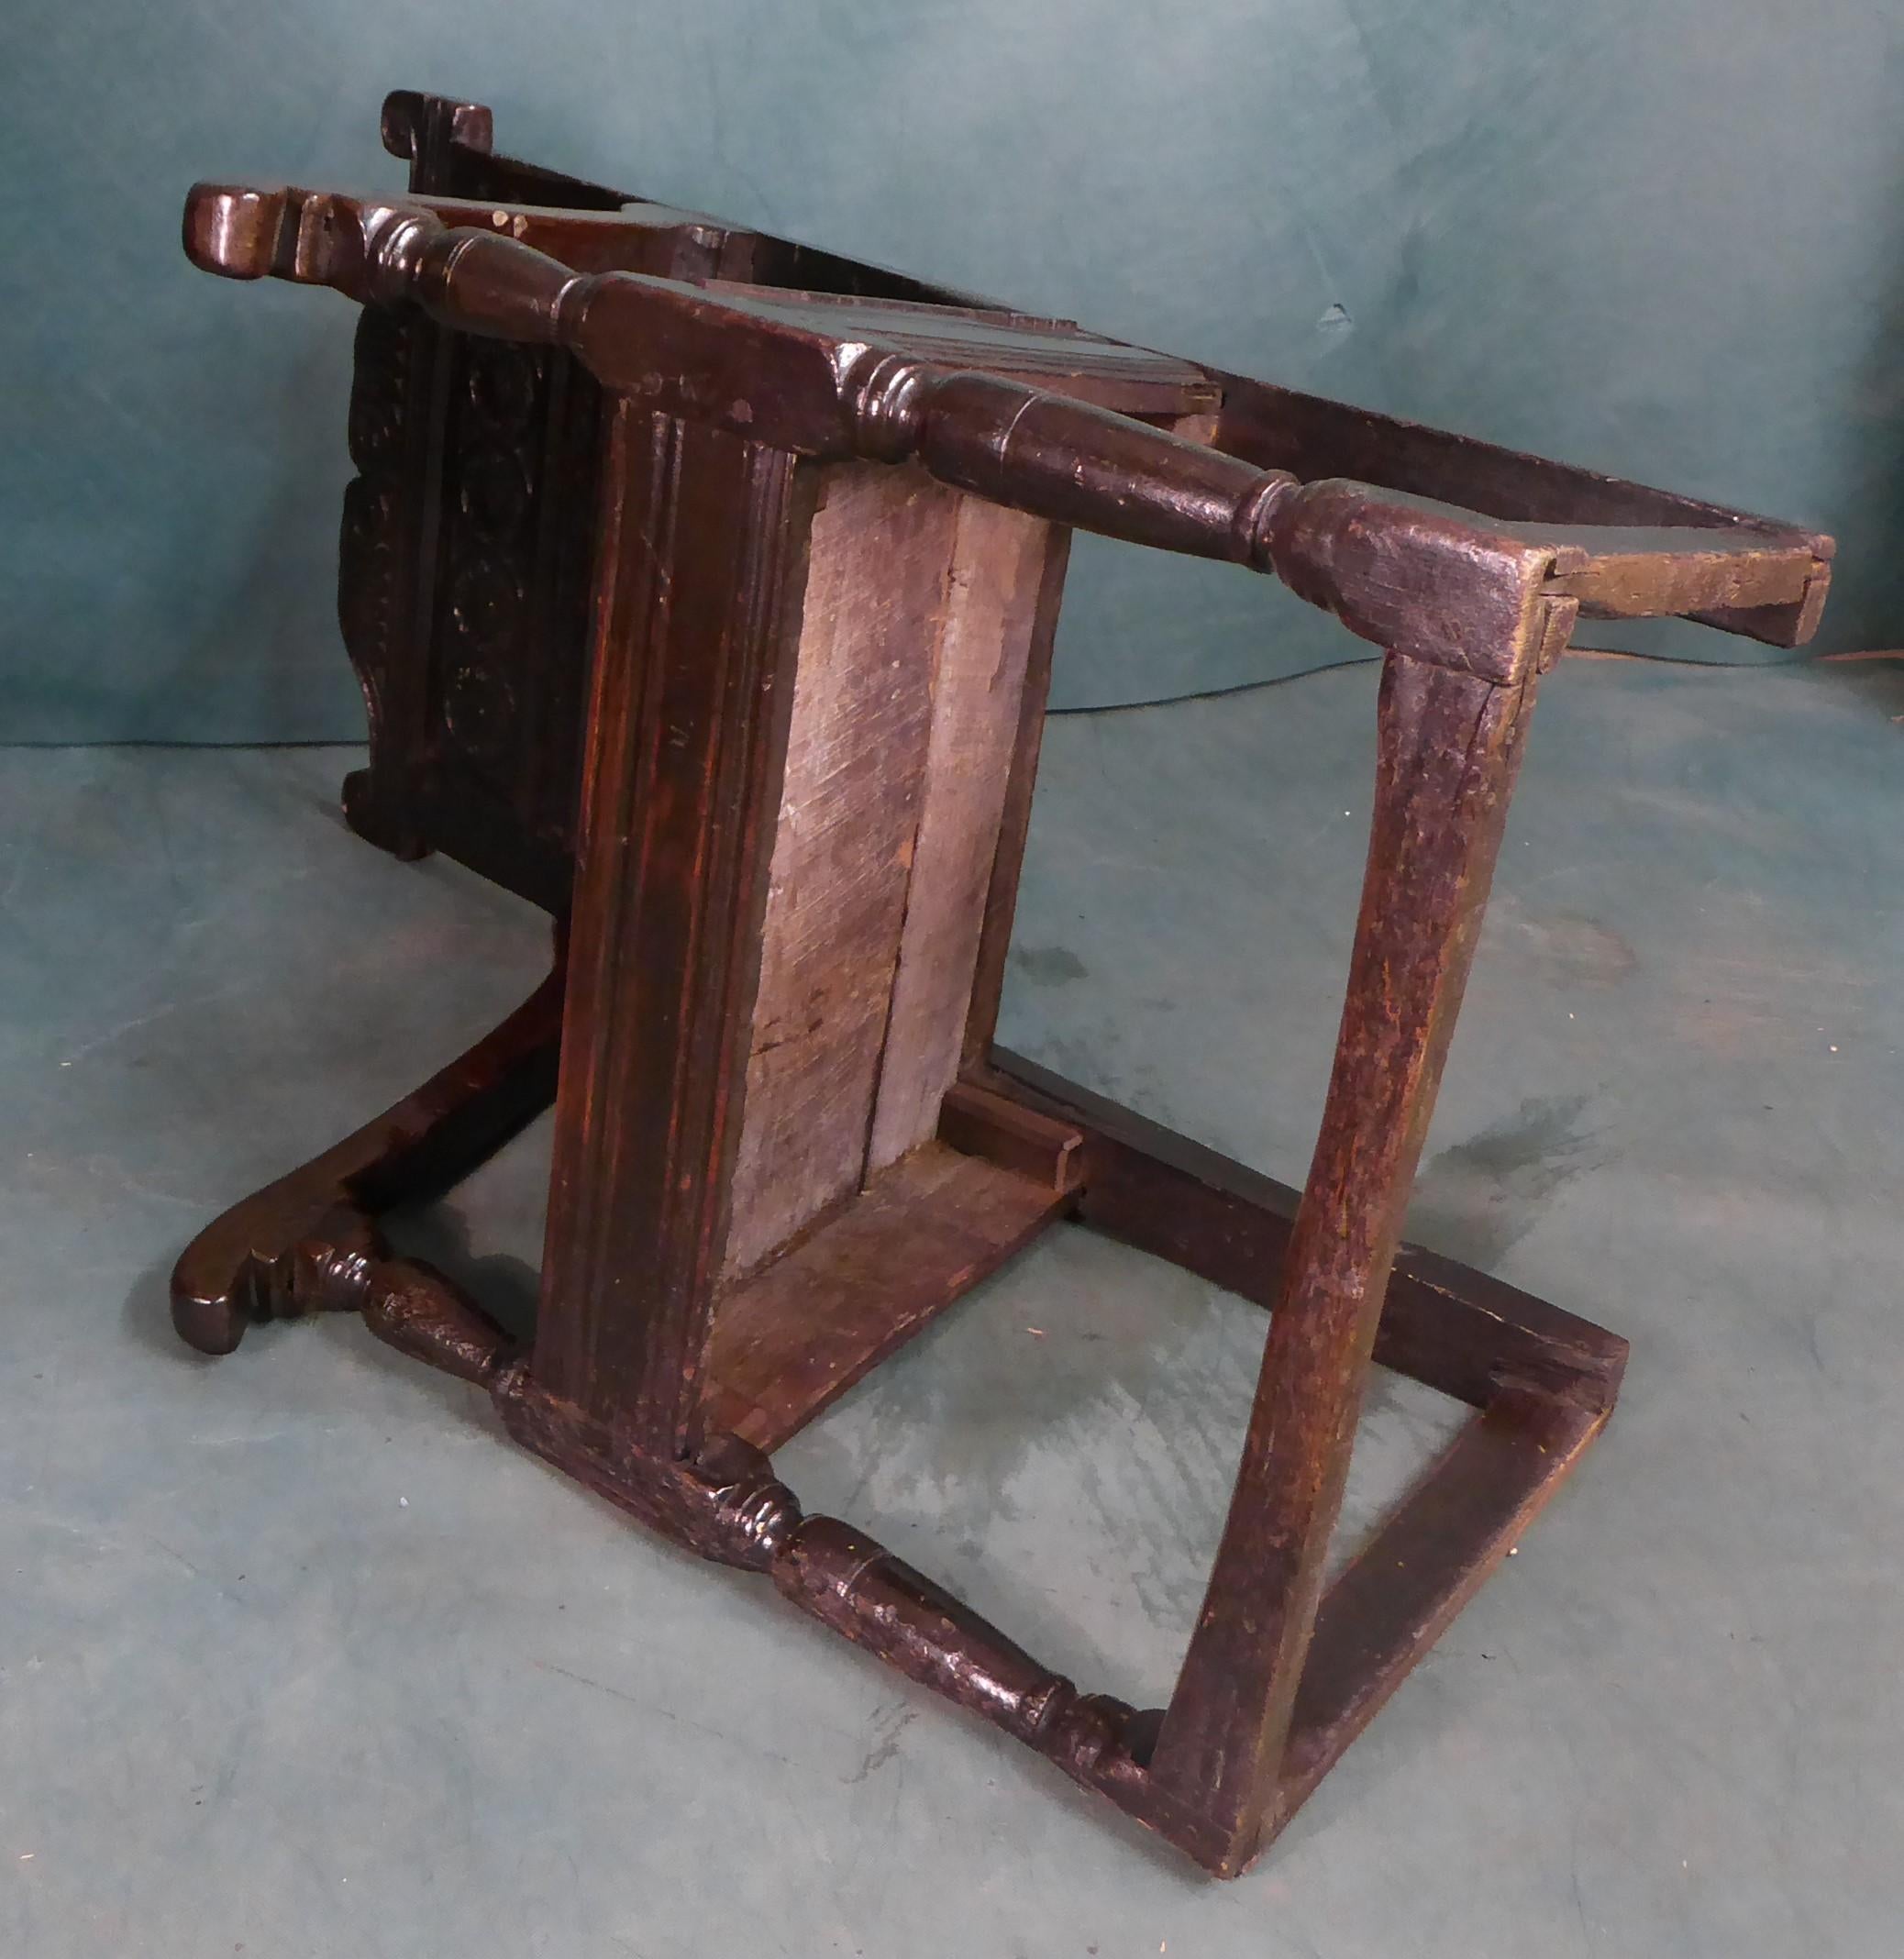 17th century oak chair with original rich patina
measurements approximate